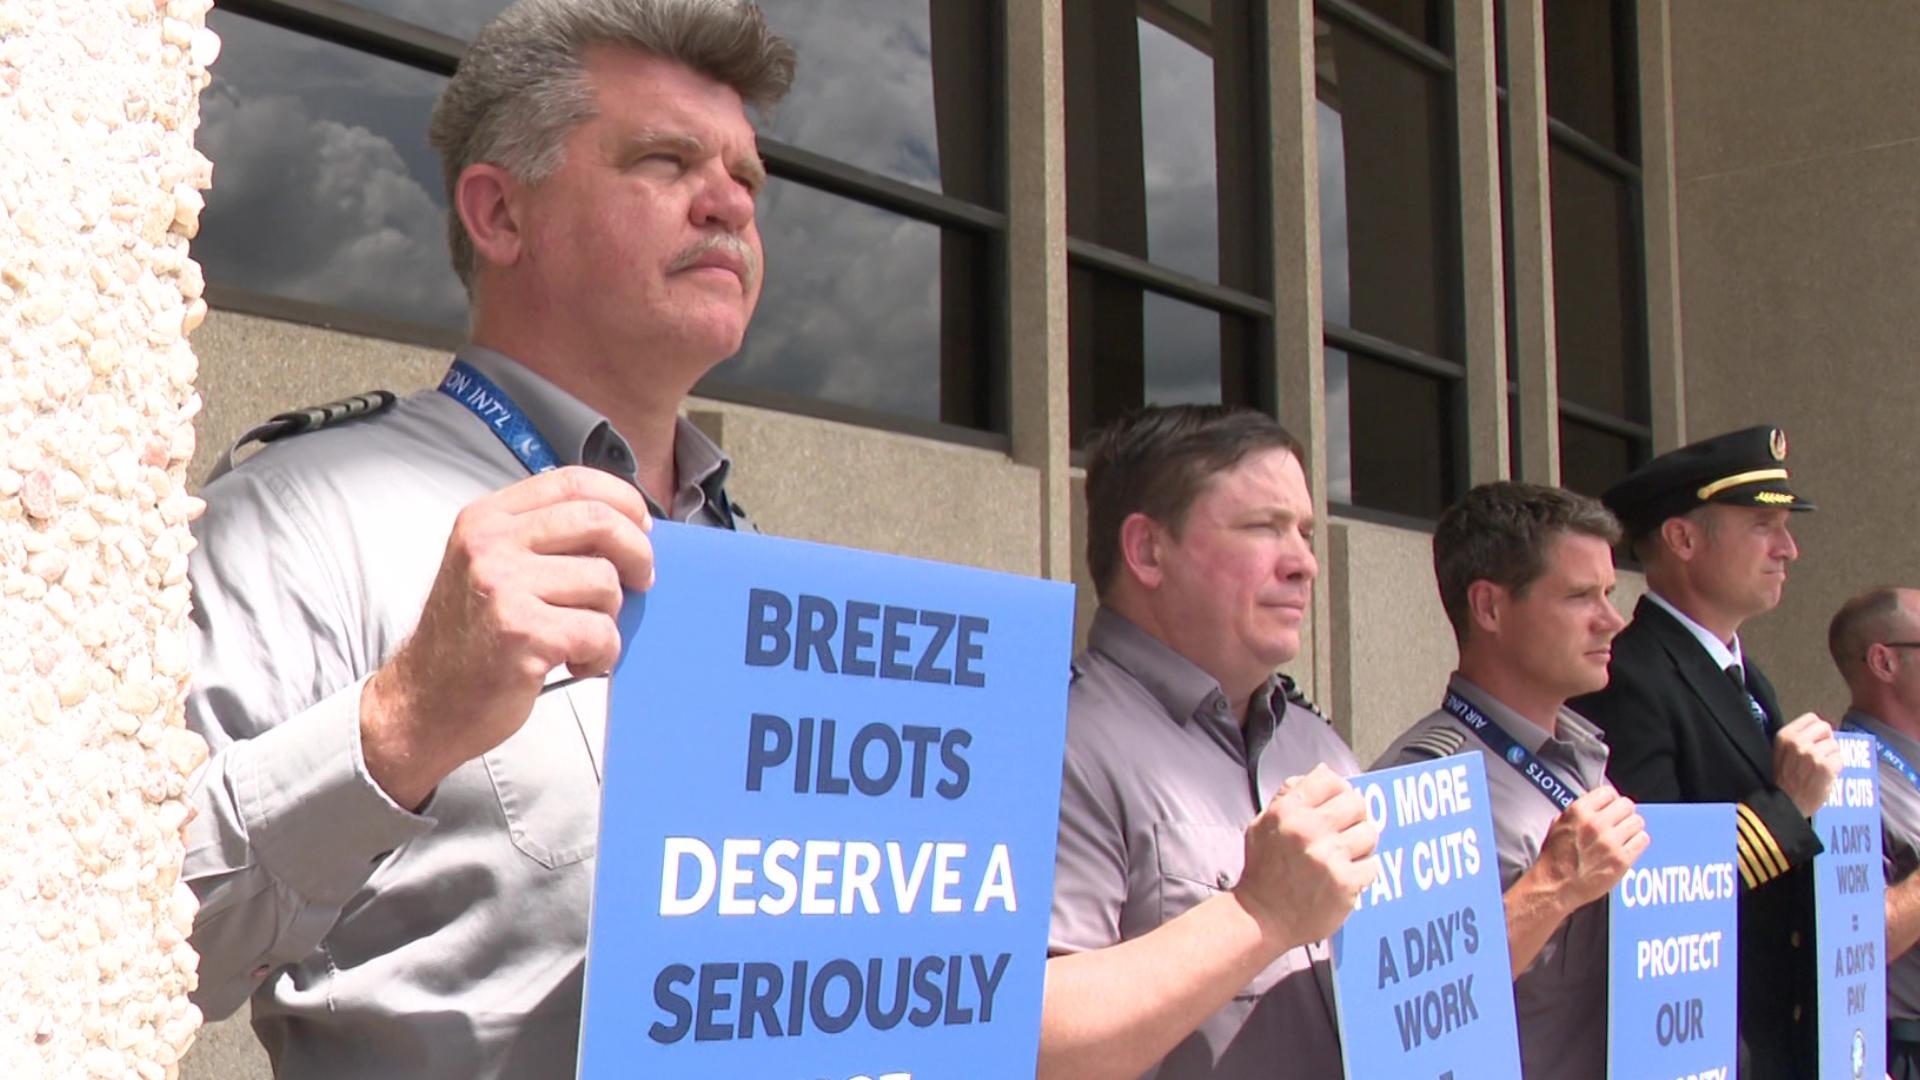 Breeze Airways pilots are picketing sending a clear message to airline management.